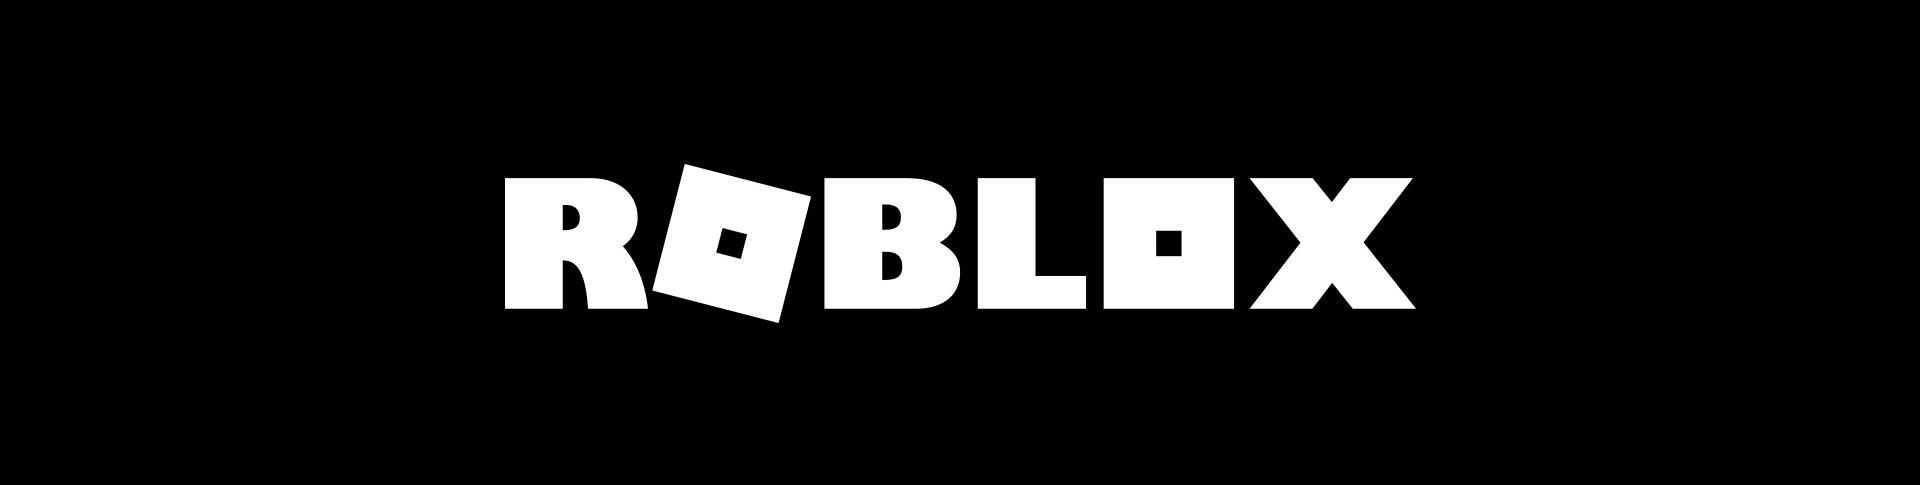 A Complete History Of The Roblox Logo Pocket Tactics - the new roblox logo fixed roblox know your meme